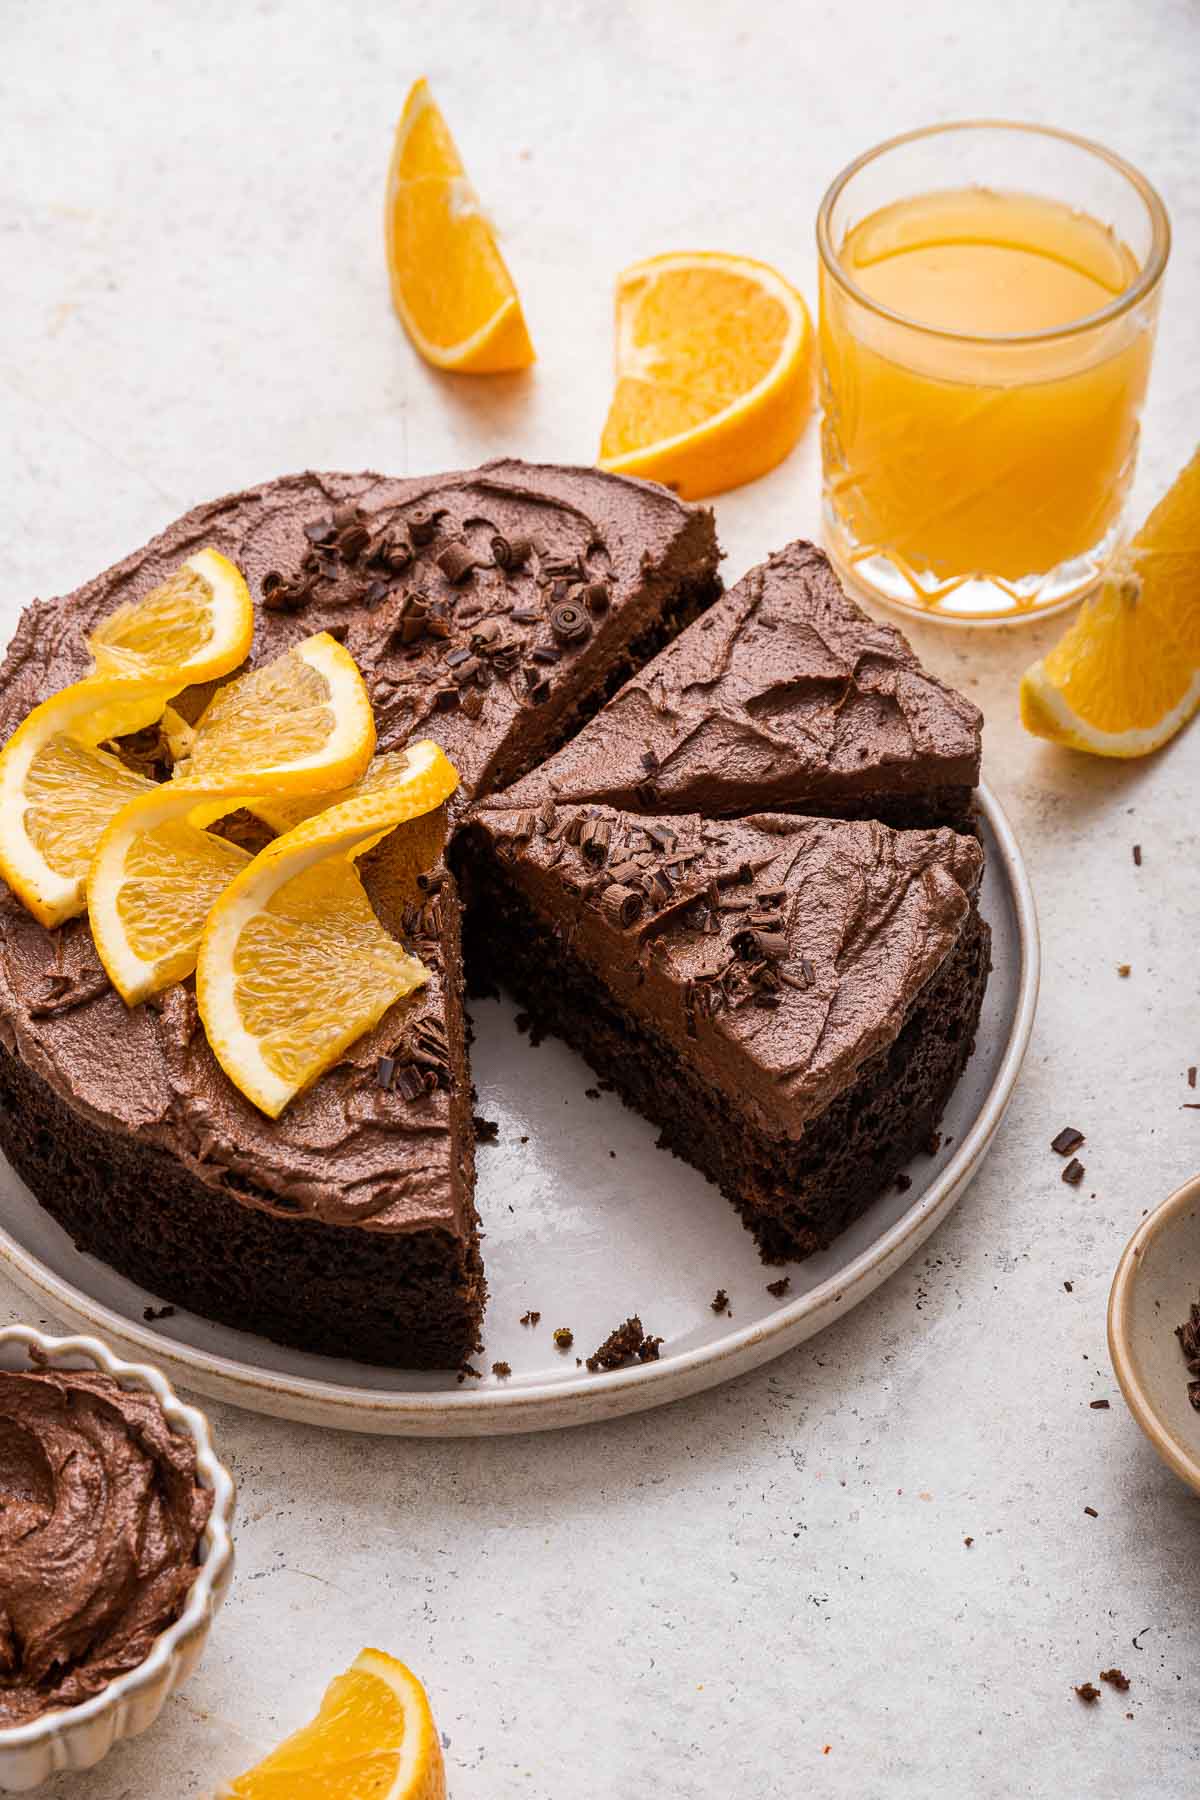 Round orange chocolate cake with chocolate frosting and orange slices on top.